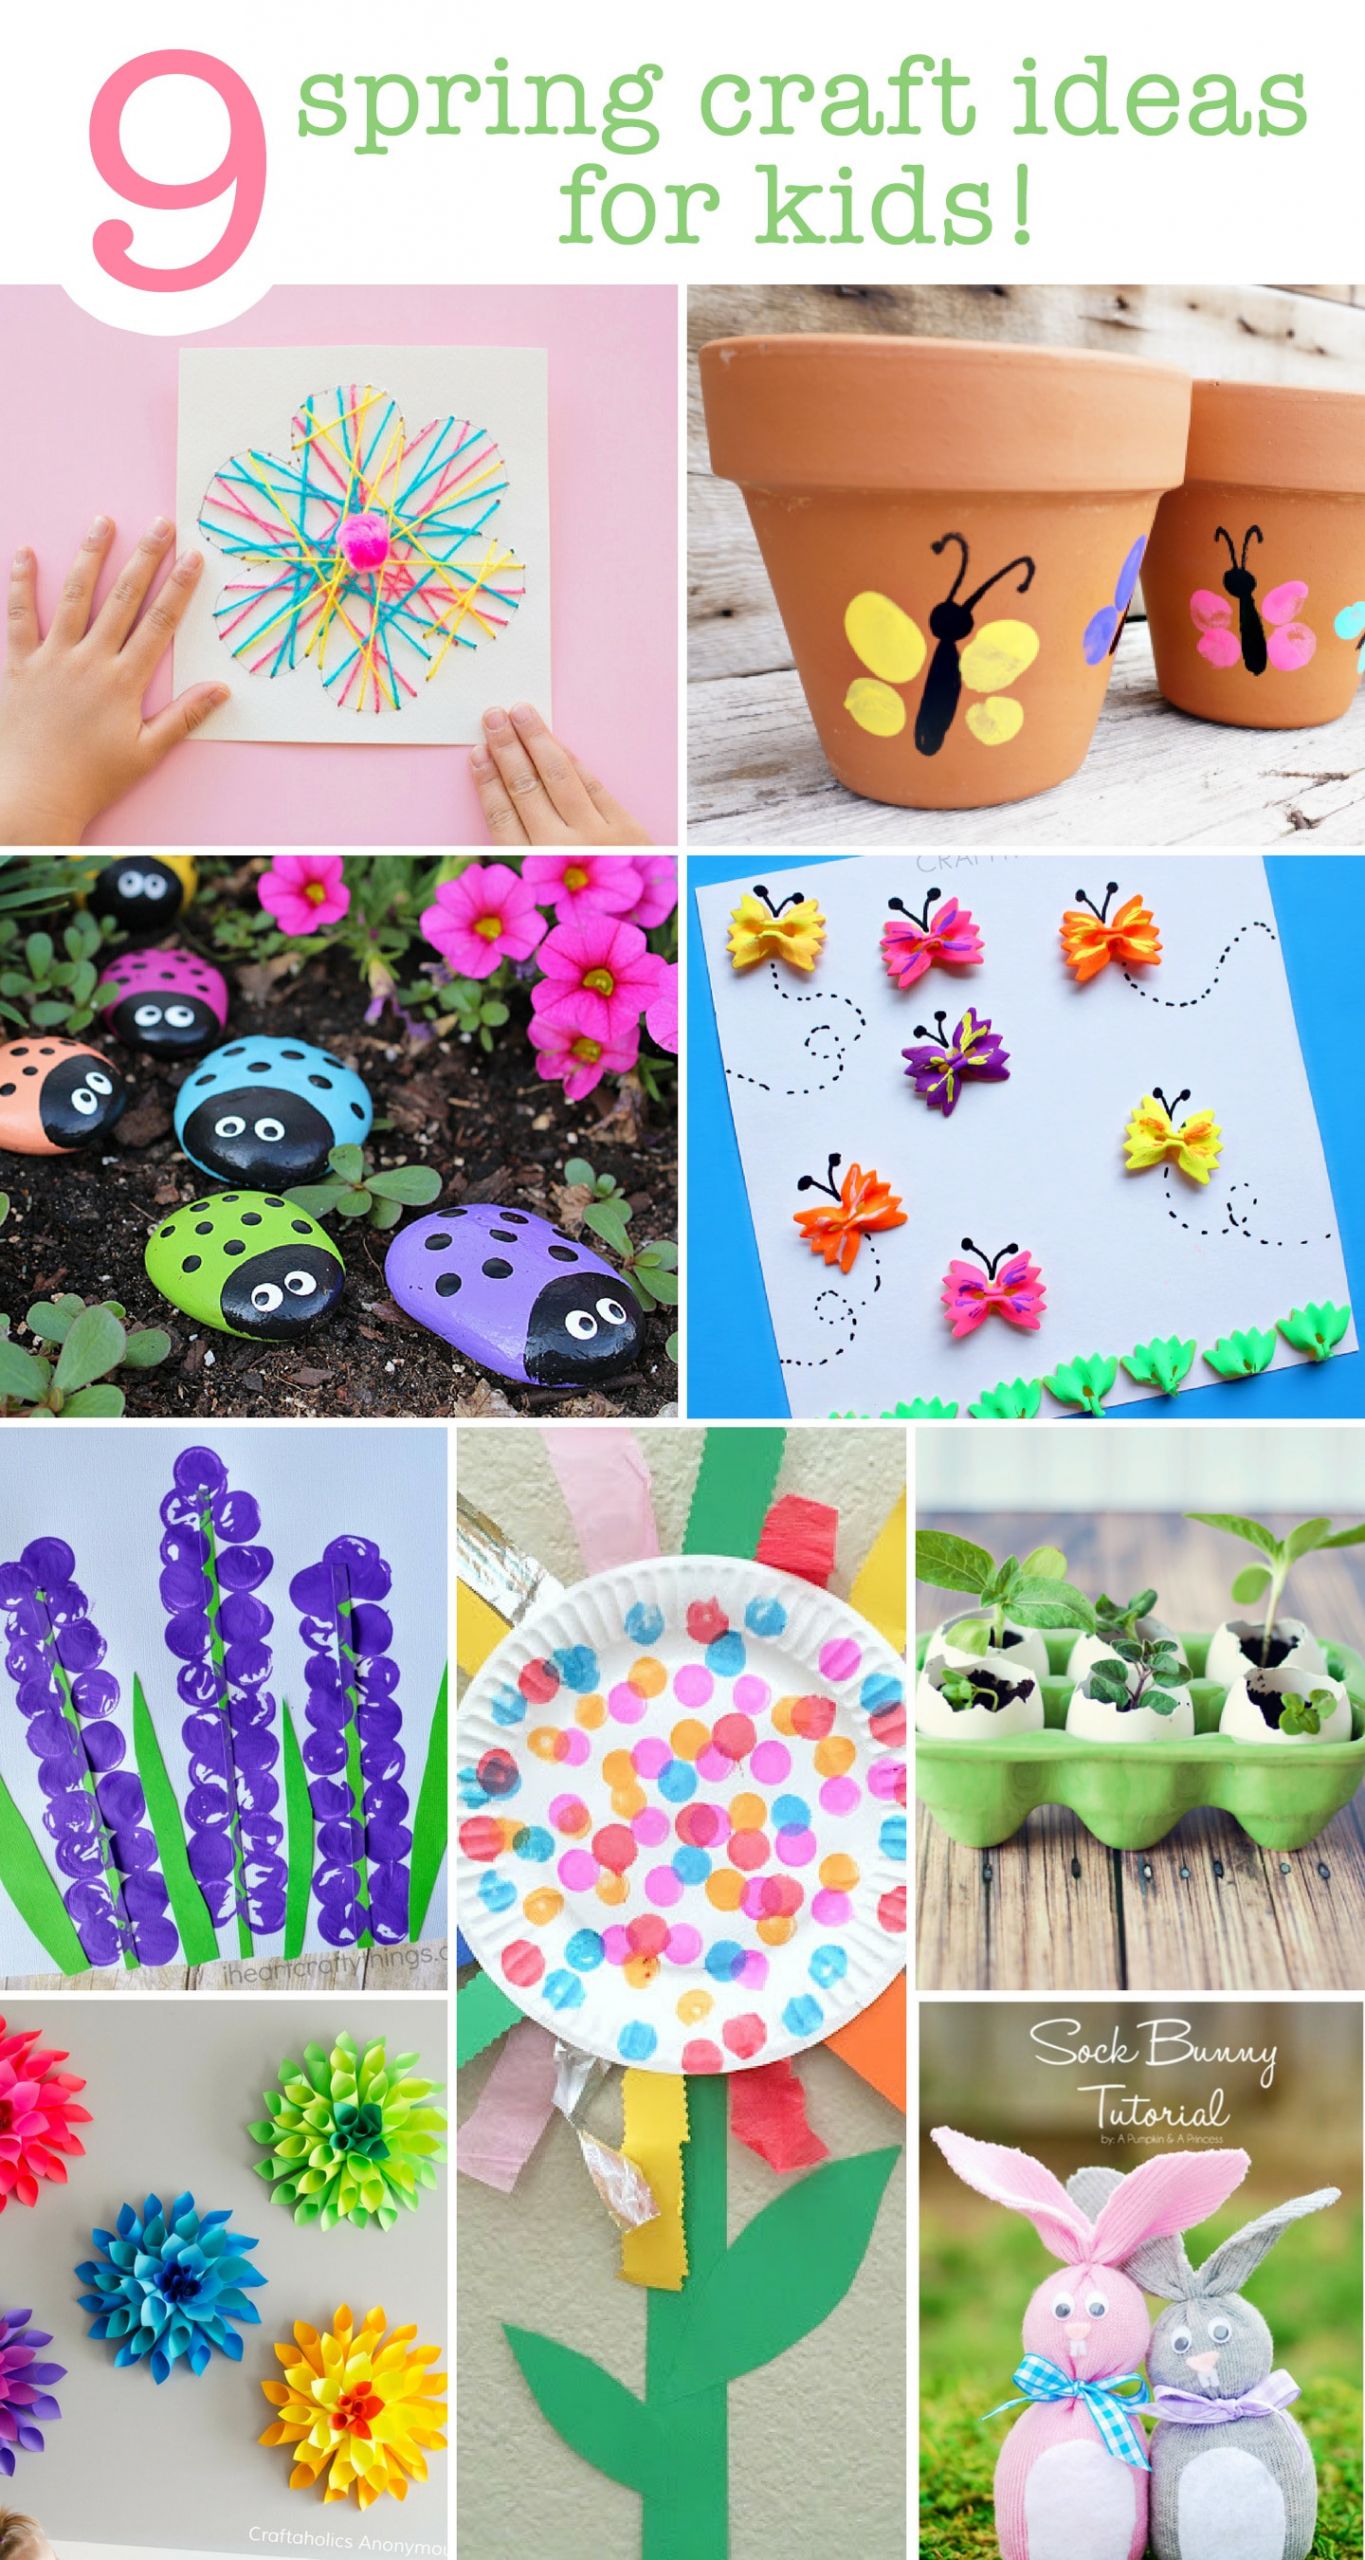 Craft Ideas Toddlers
 9 Spring Craft Ideas For The Kids